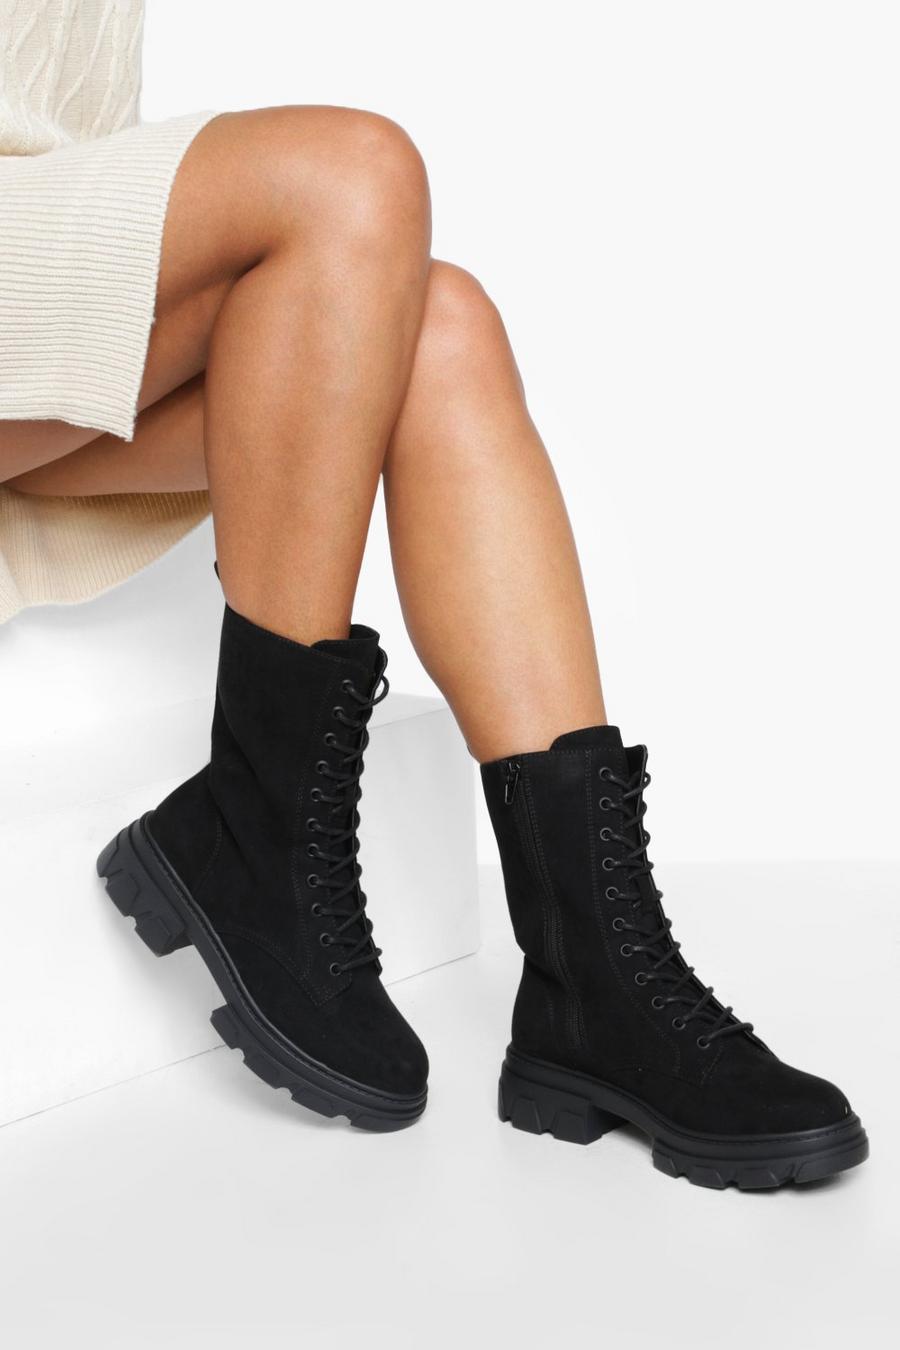 Black Chunky Cleated Sole Hiker Boots